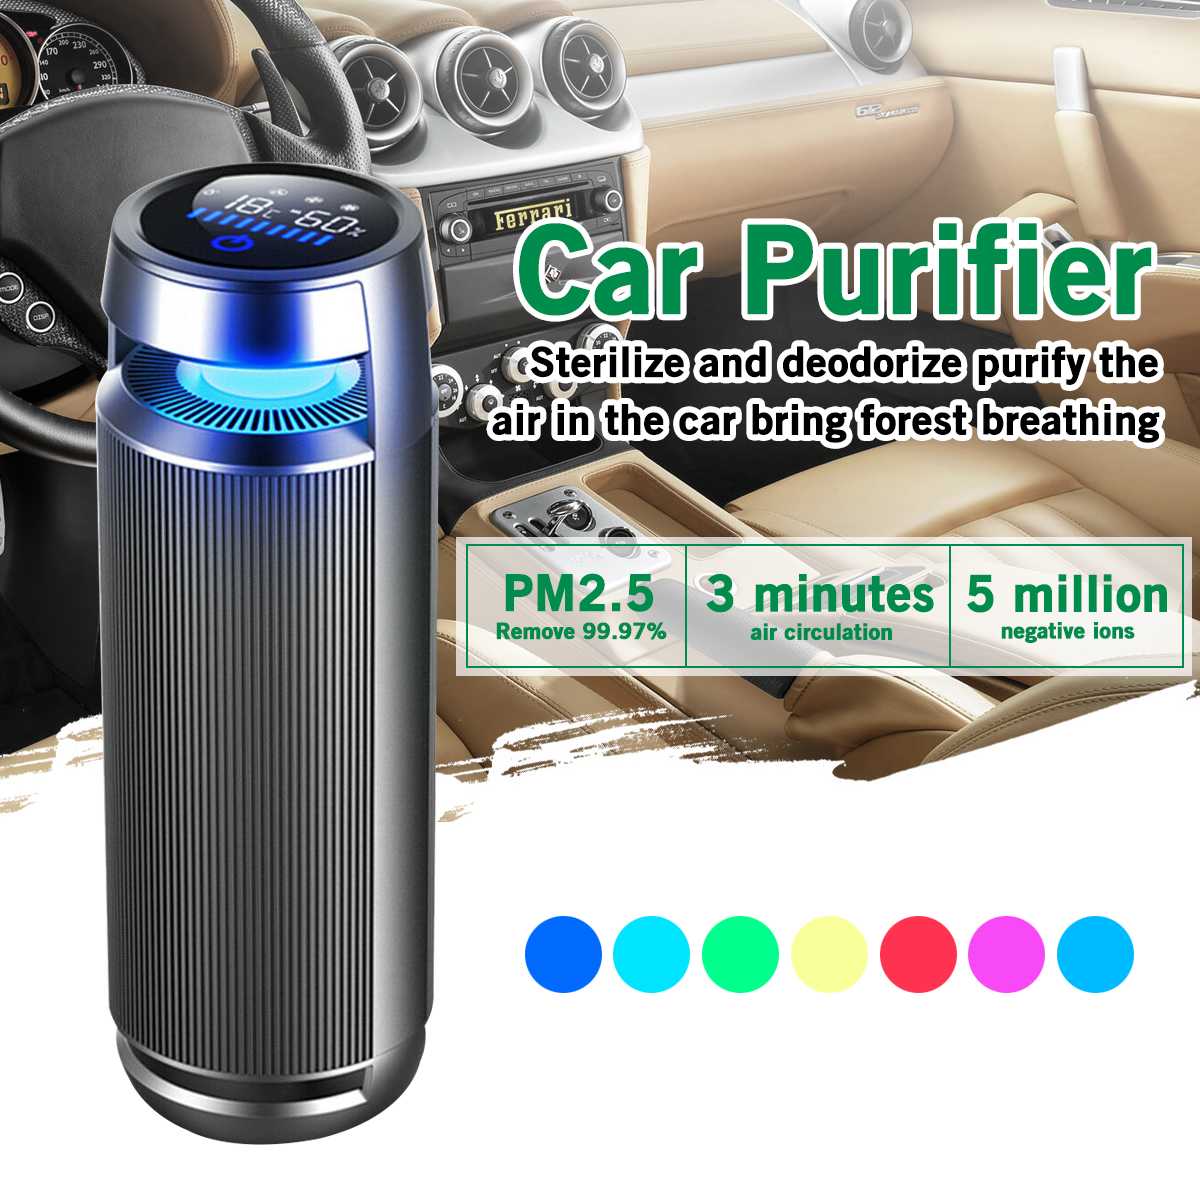 AUGIENB HEPA USB Car Air Purifier Negative Ion Air Cleaner for PM2.5 Formaldehyde Smoke Odor Allergies with LED Light Room